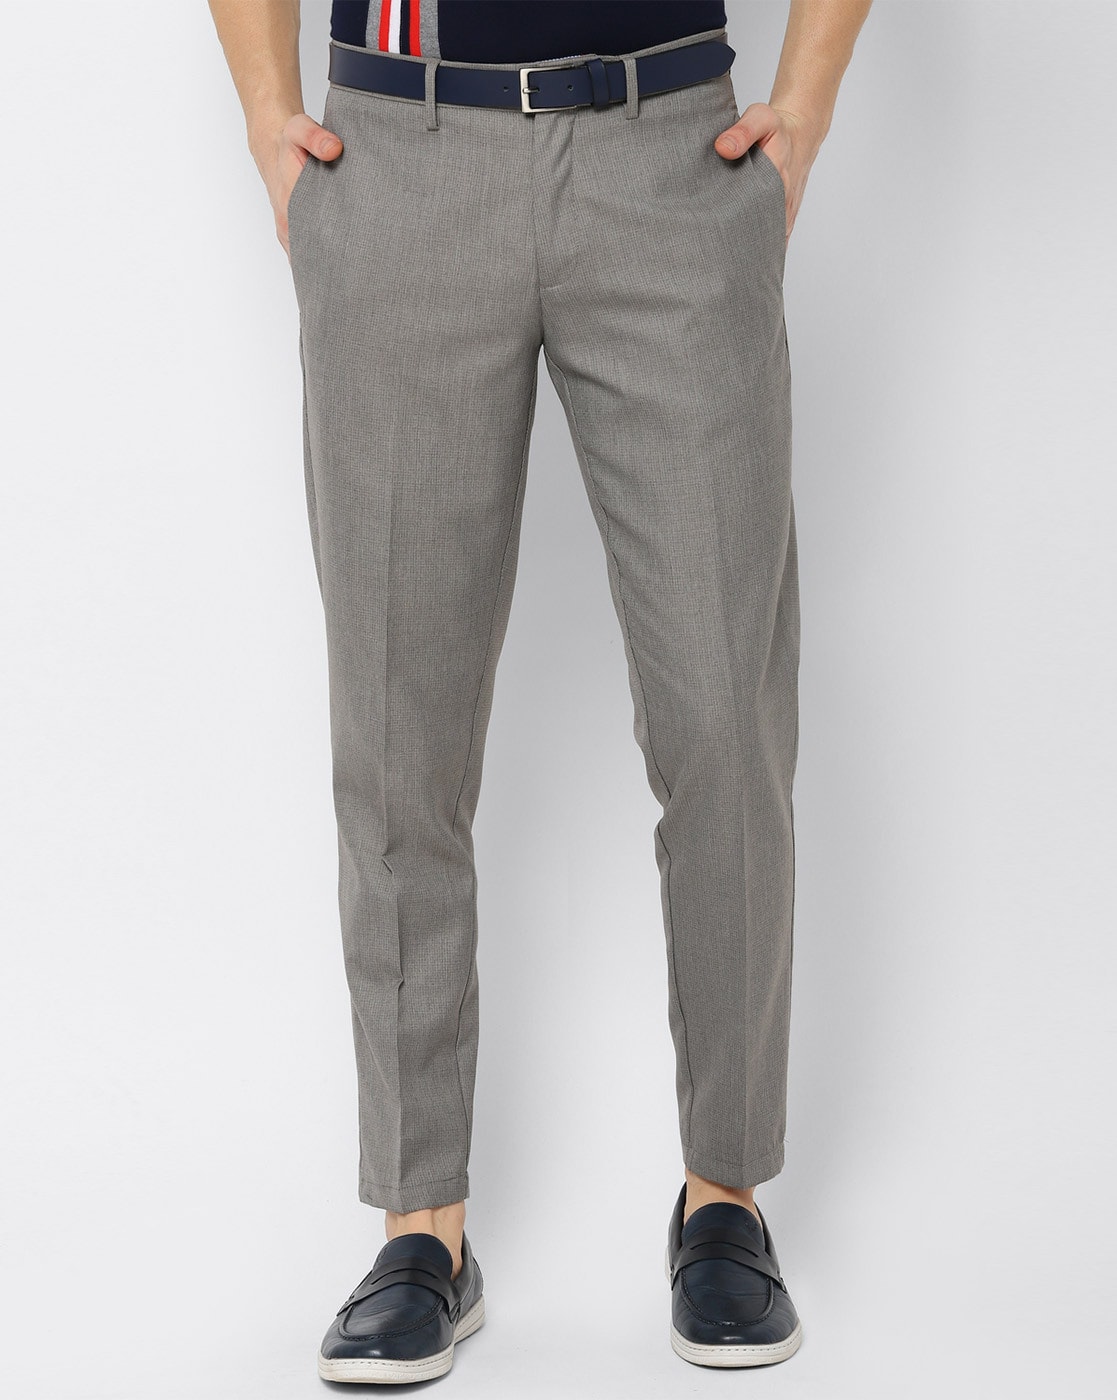 Allen Solly Woman Bottoms Pants and Trousers  Buy Allen Solly Grey Trousers  Online  Nykaa Fashion